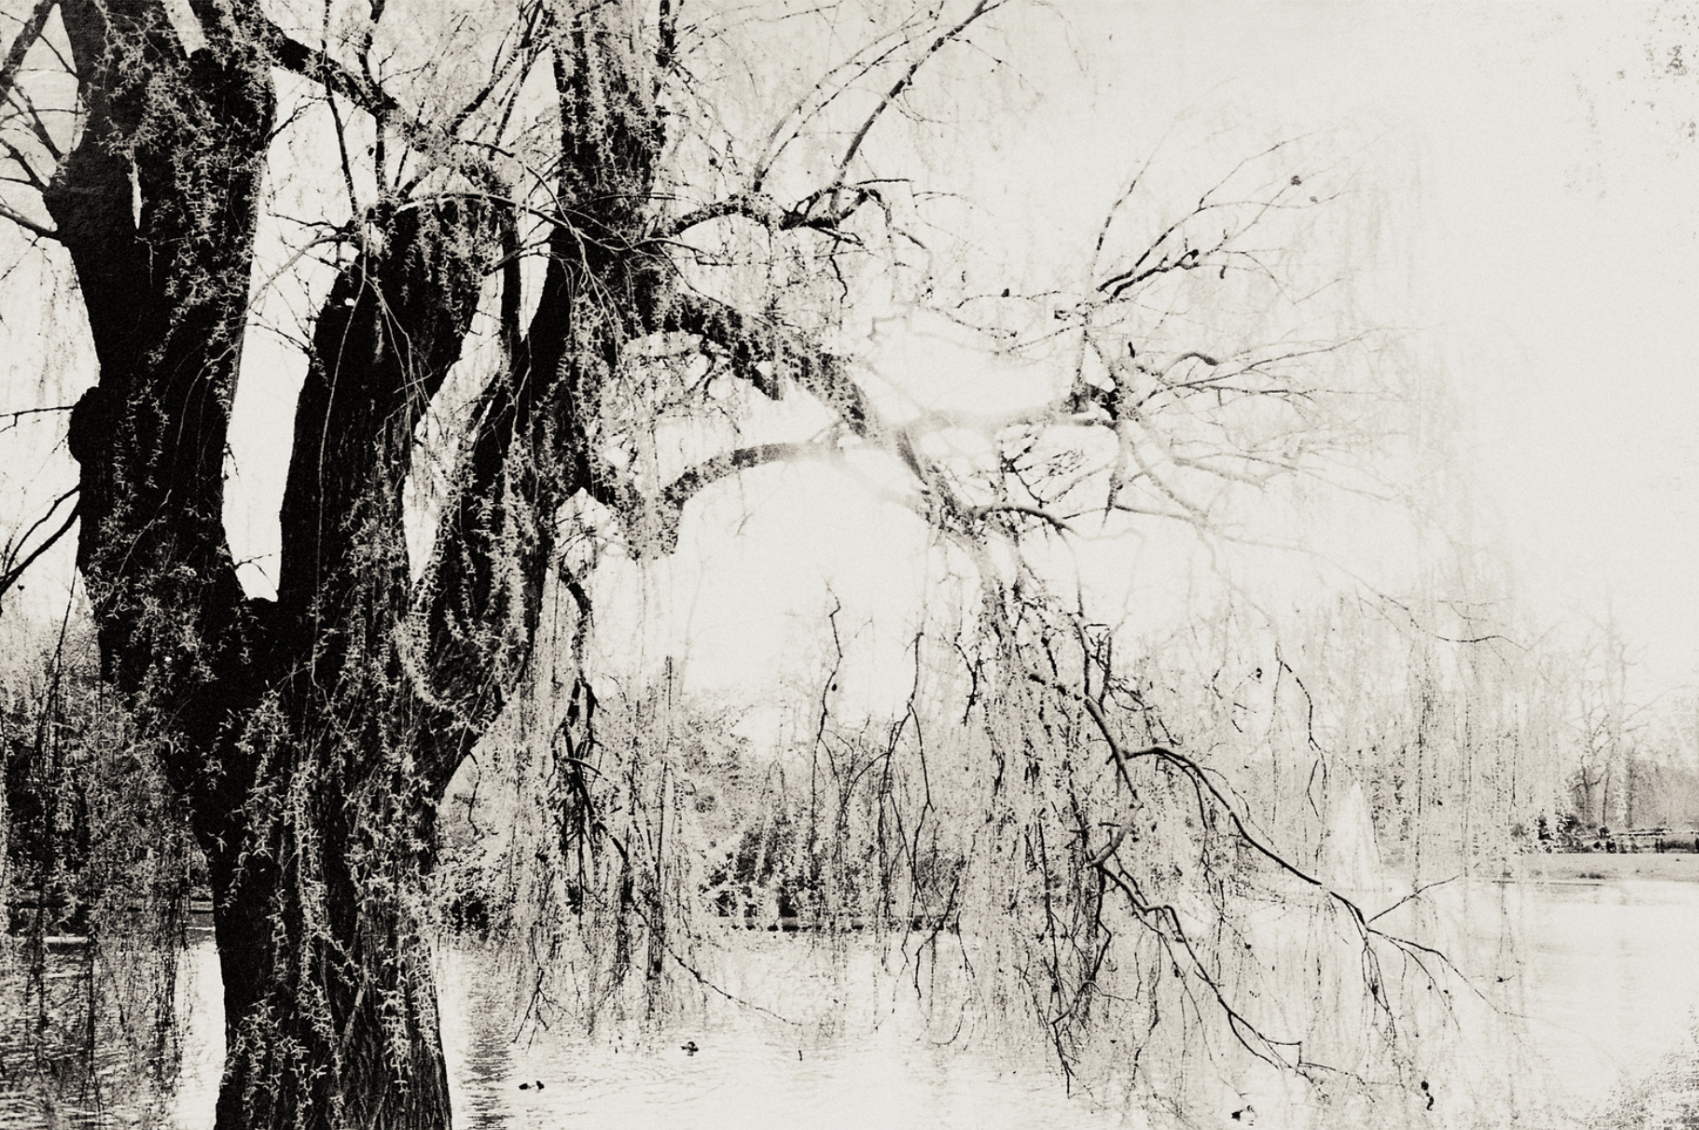 Ghostly landscape of a weeping willow by a lake